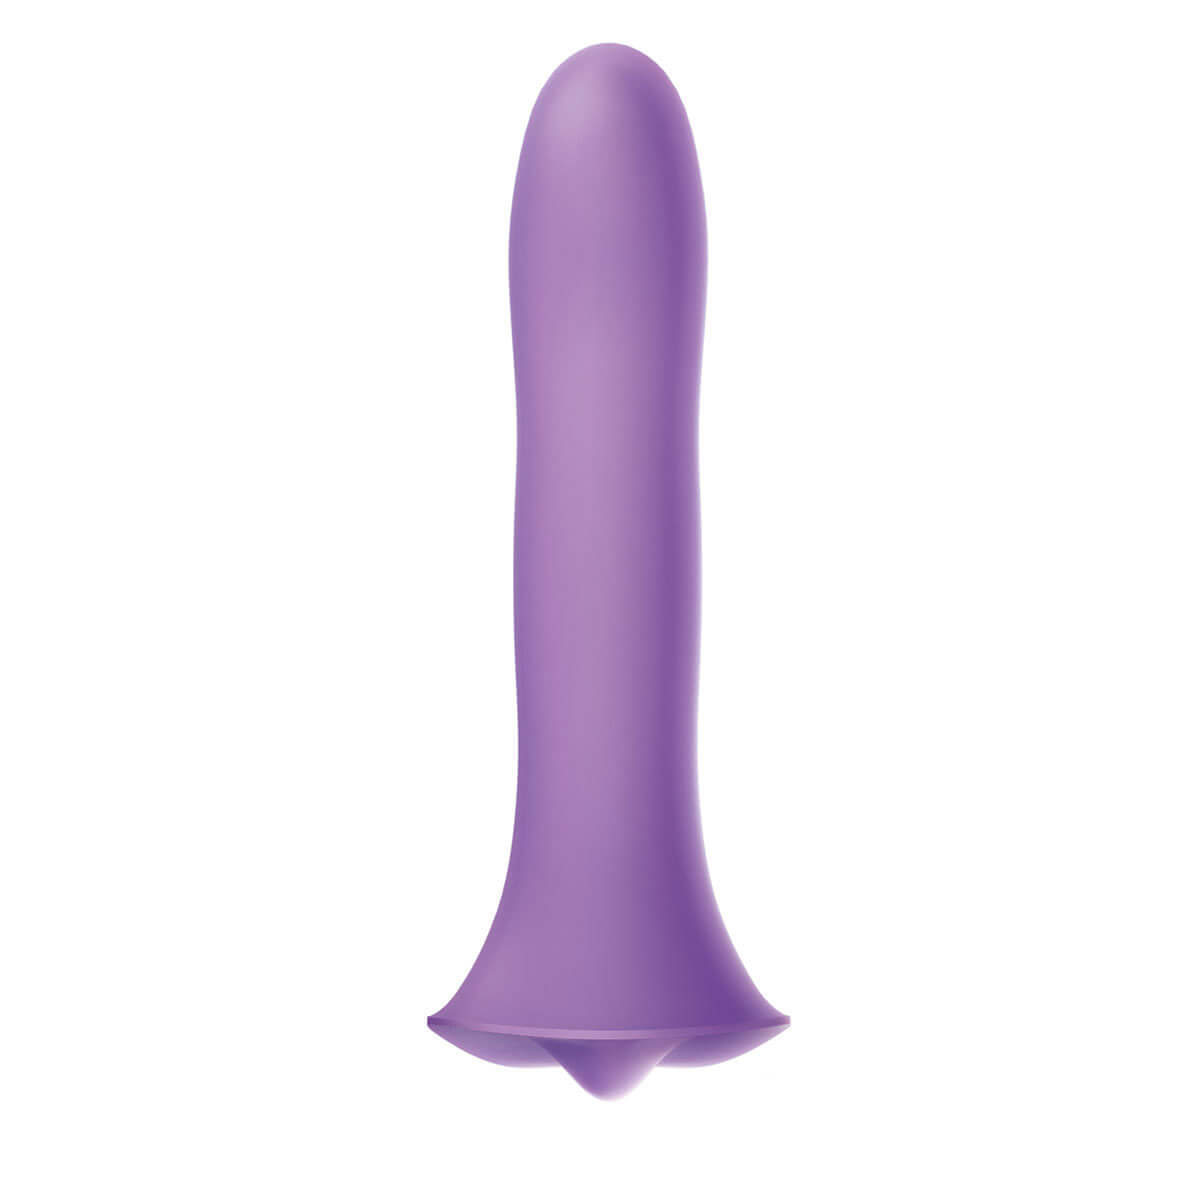 Wet for Her Fusion Strap On Dildo in Purple